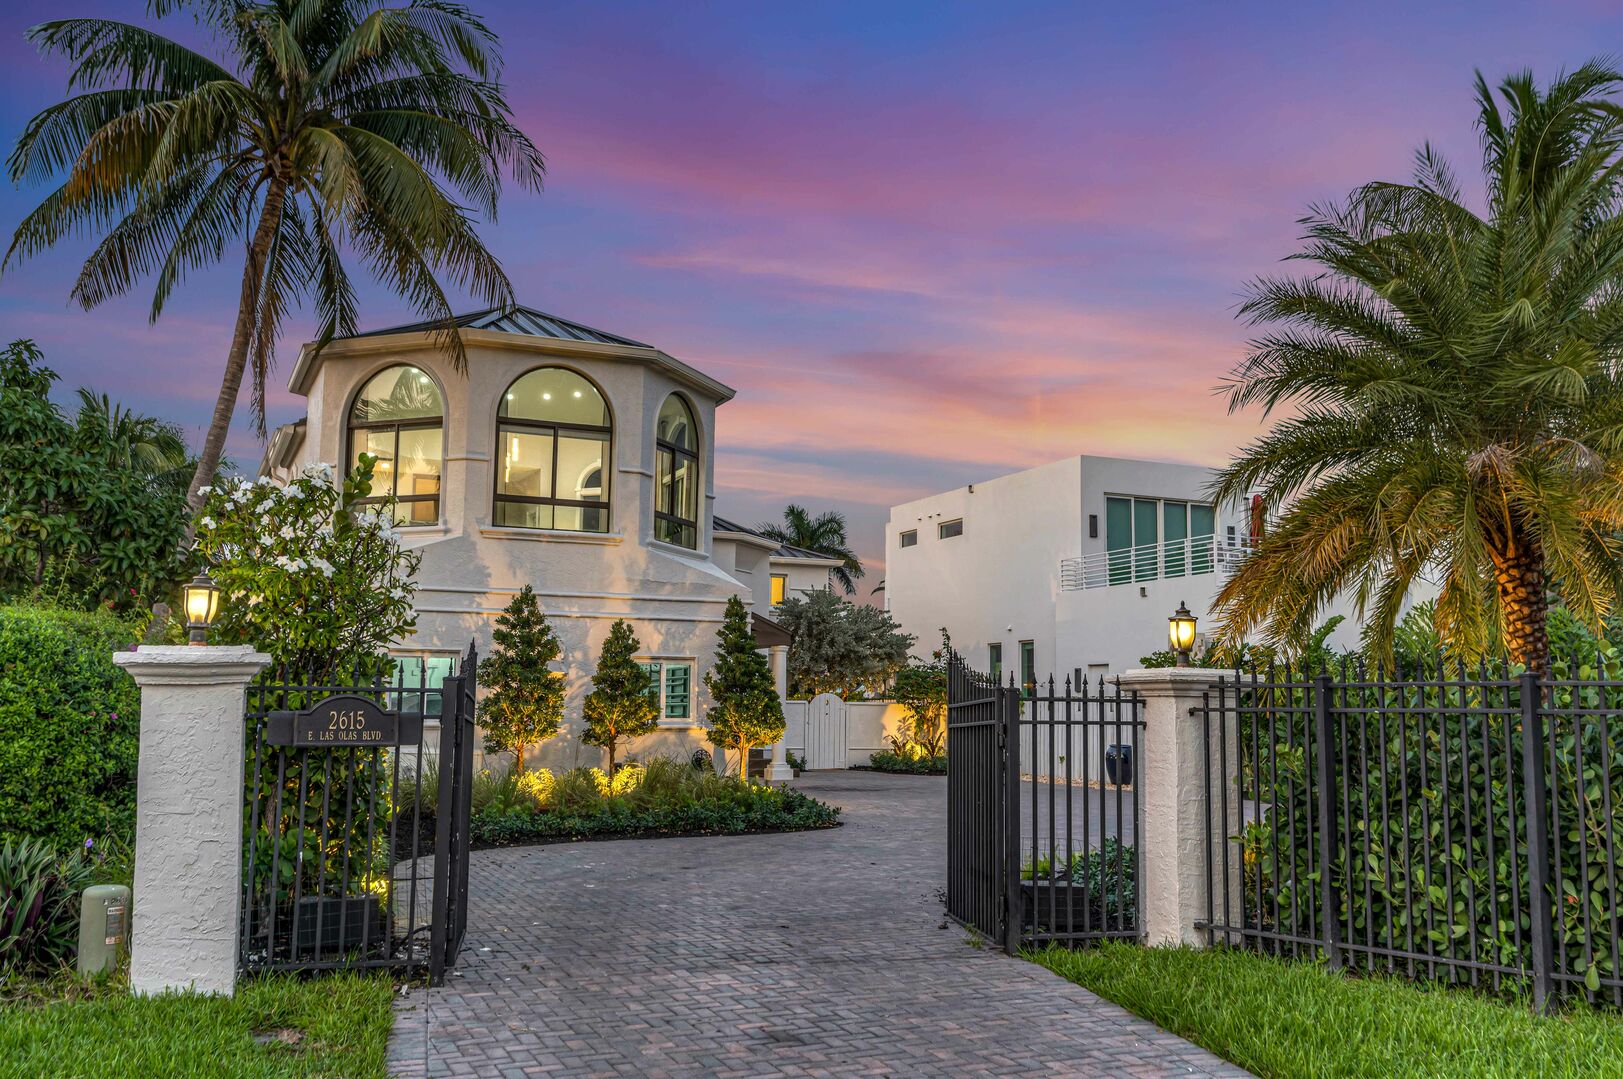 Nested in the middle of Seven Isles just off the picturesque Las Olas Blvd.